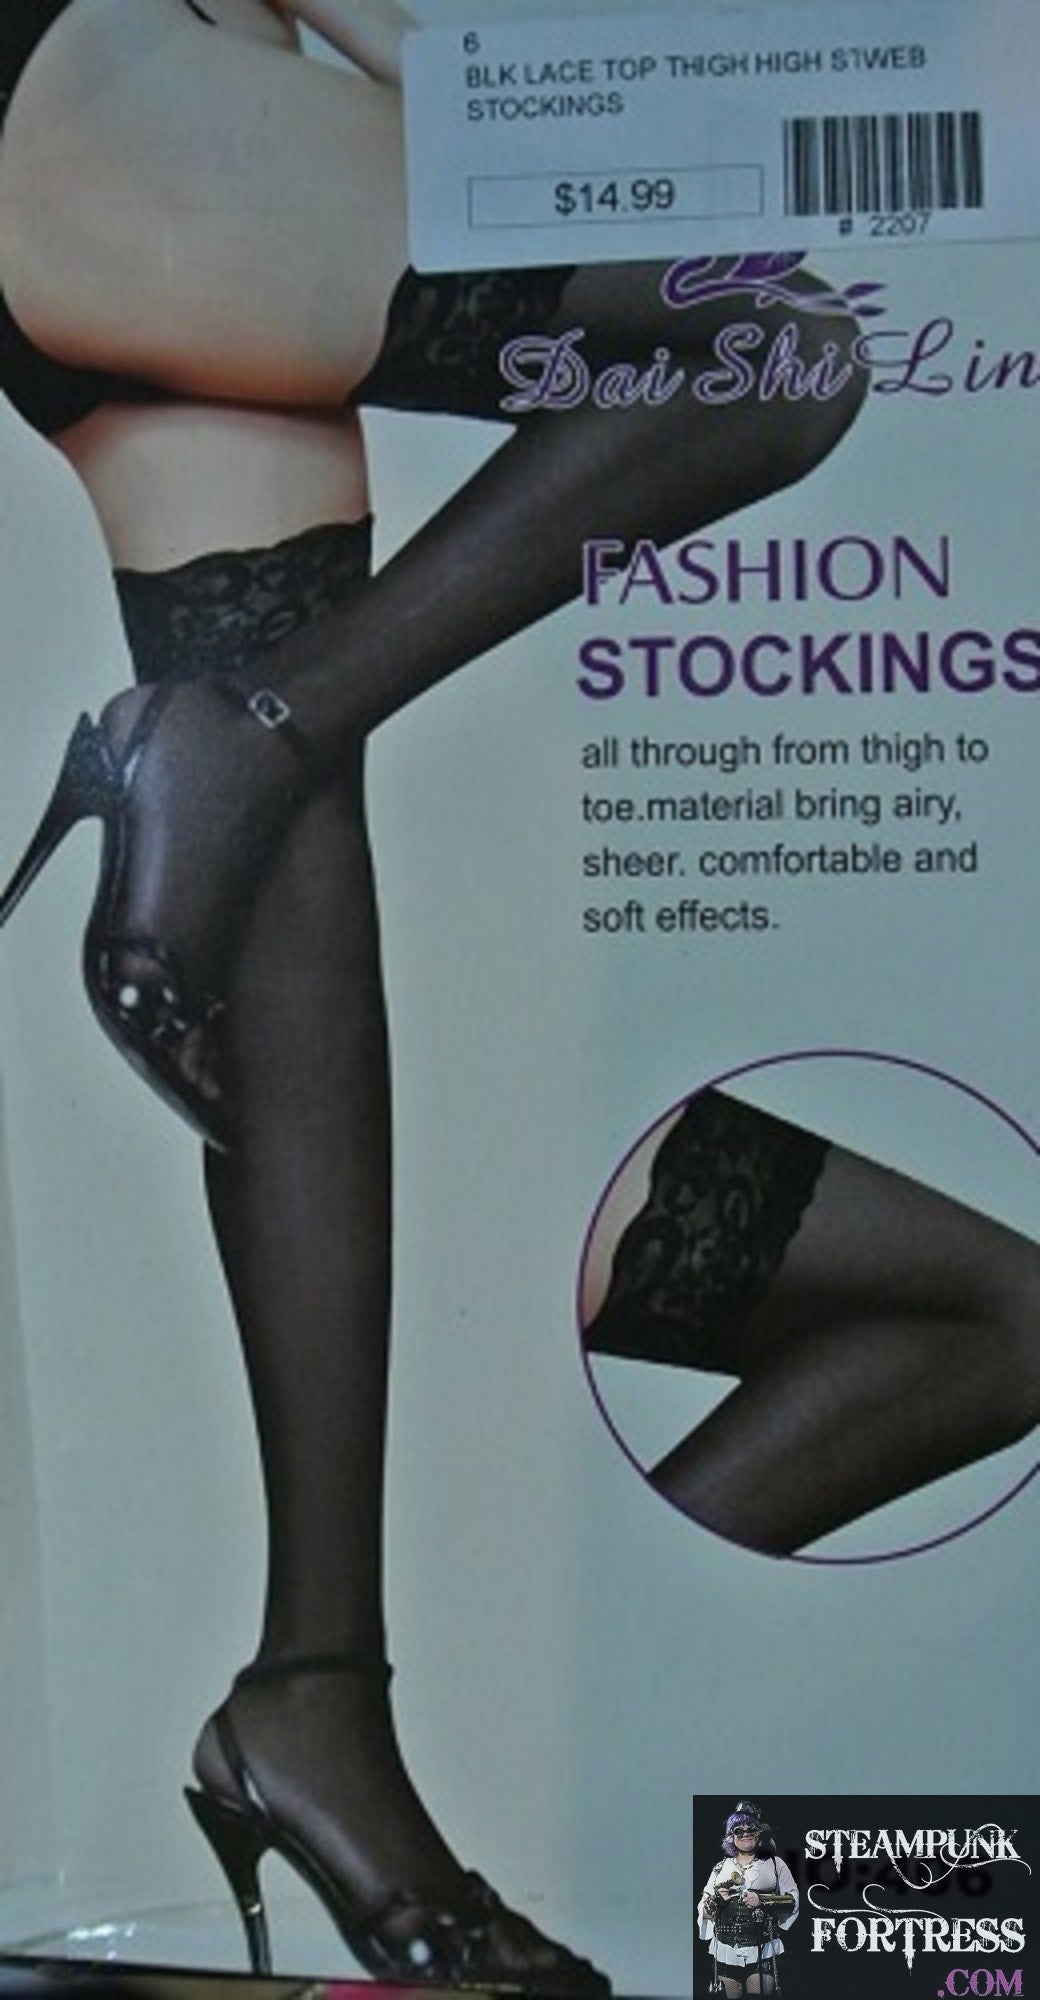 BLACK SHEER LACE TOP NEW OVER THE KNEE THIGH HIGHS HIS TIGHTS NYLONS HOSIERY STOCKINGS ONE SIZE FITS MOST - NEW - MASS PRODUCED DUPLICATE